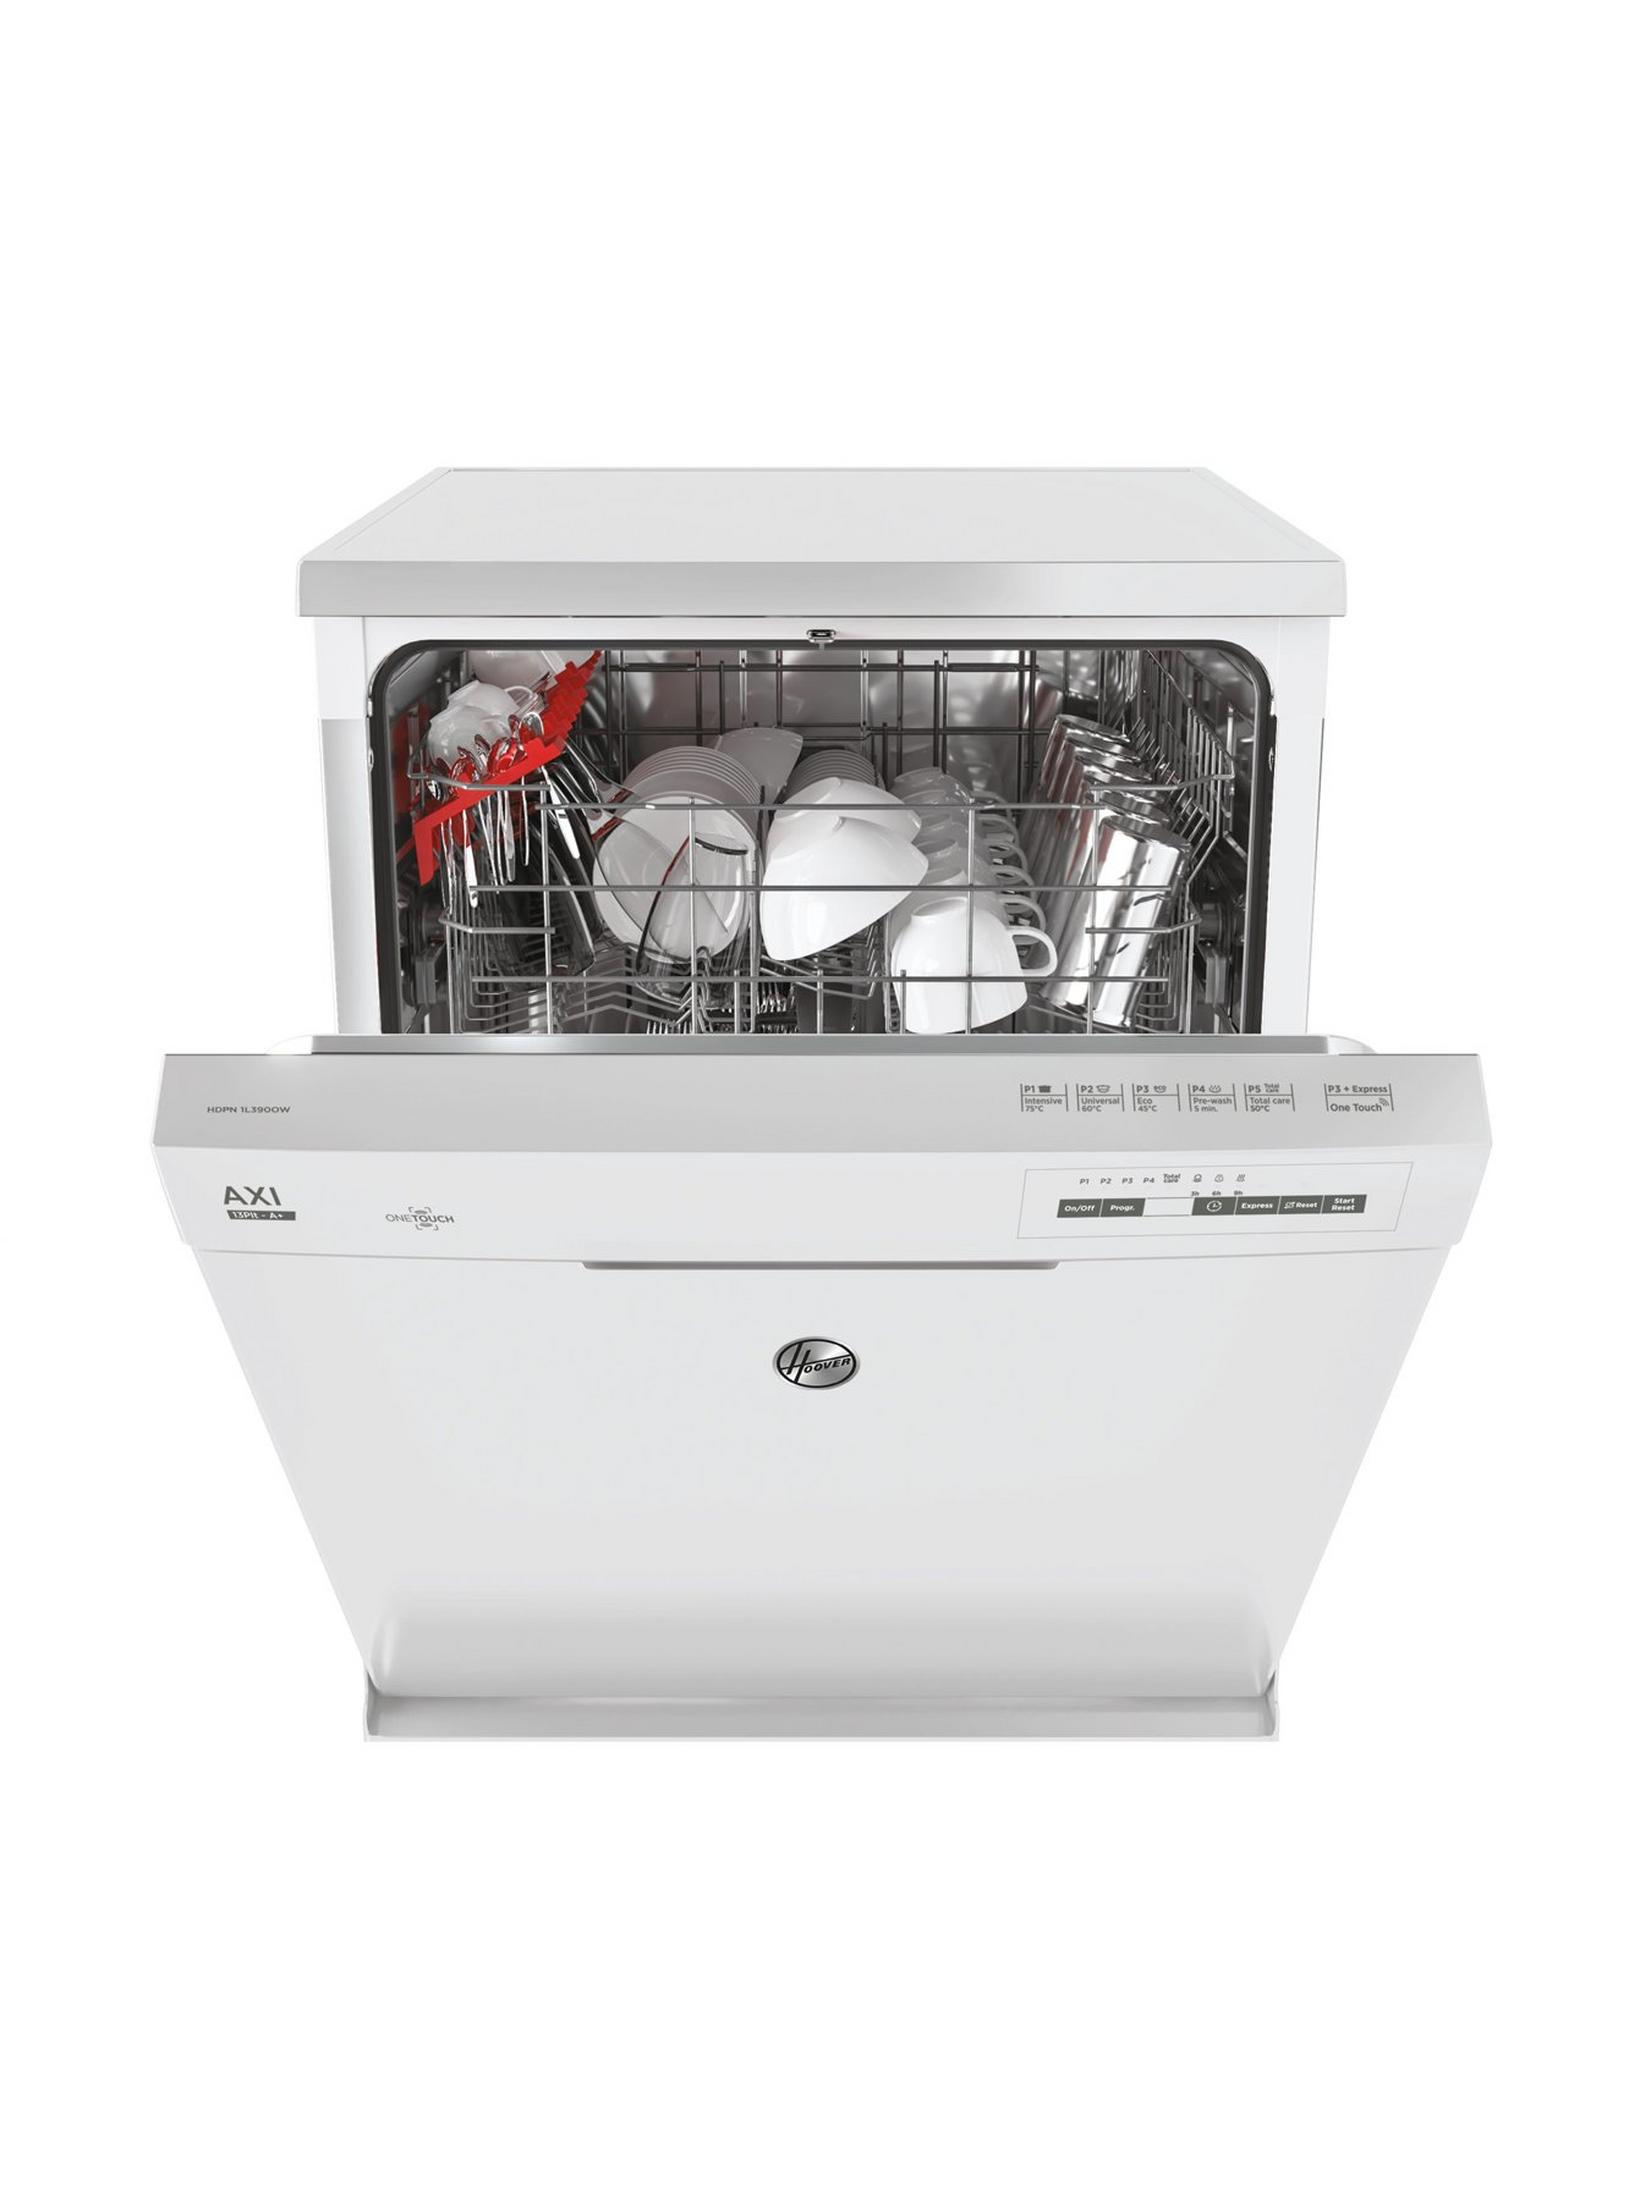 Hoover HDPN1L390OW White Freestanding Full Size Dishwasher Cosmetic damage 0049